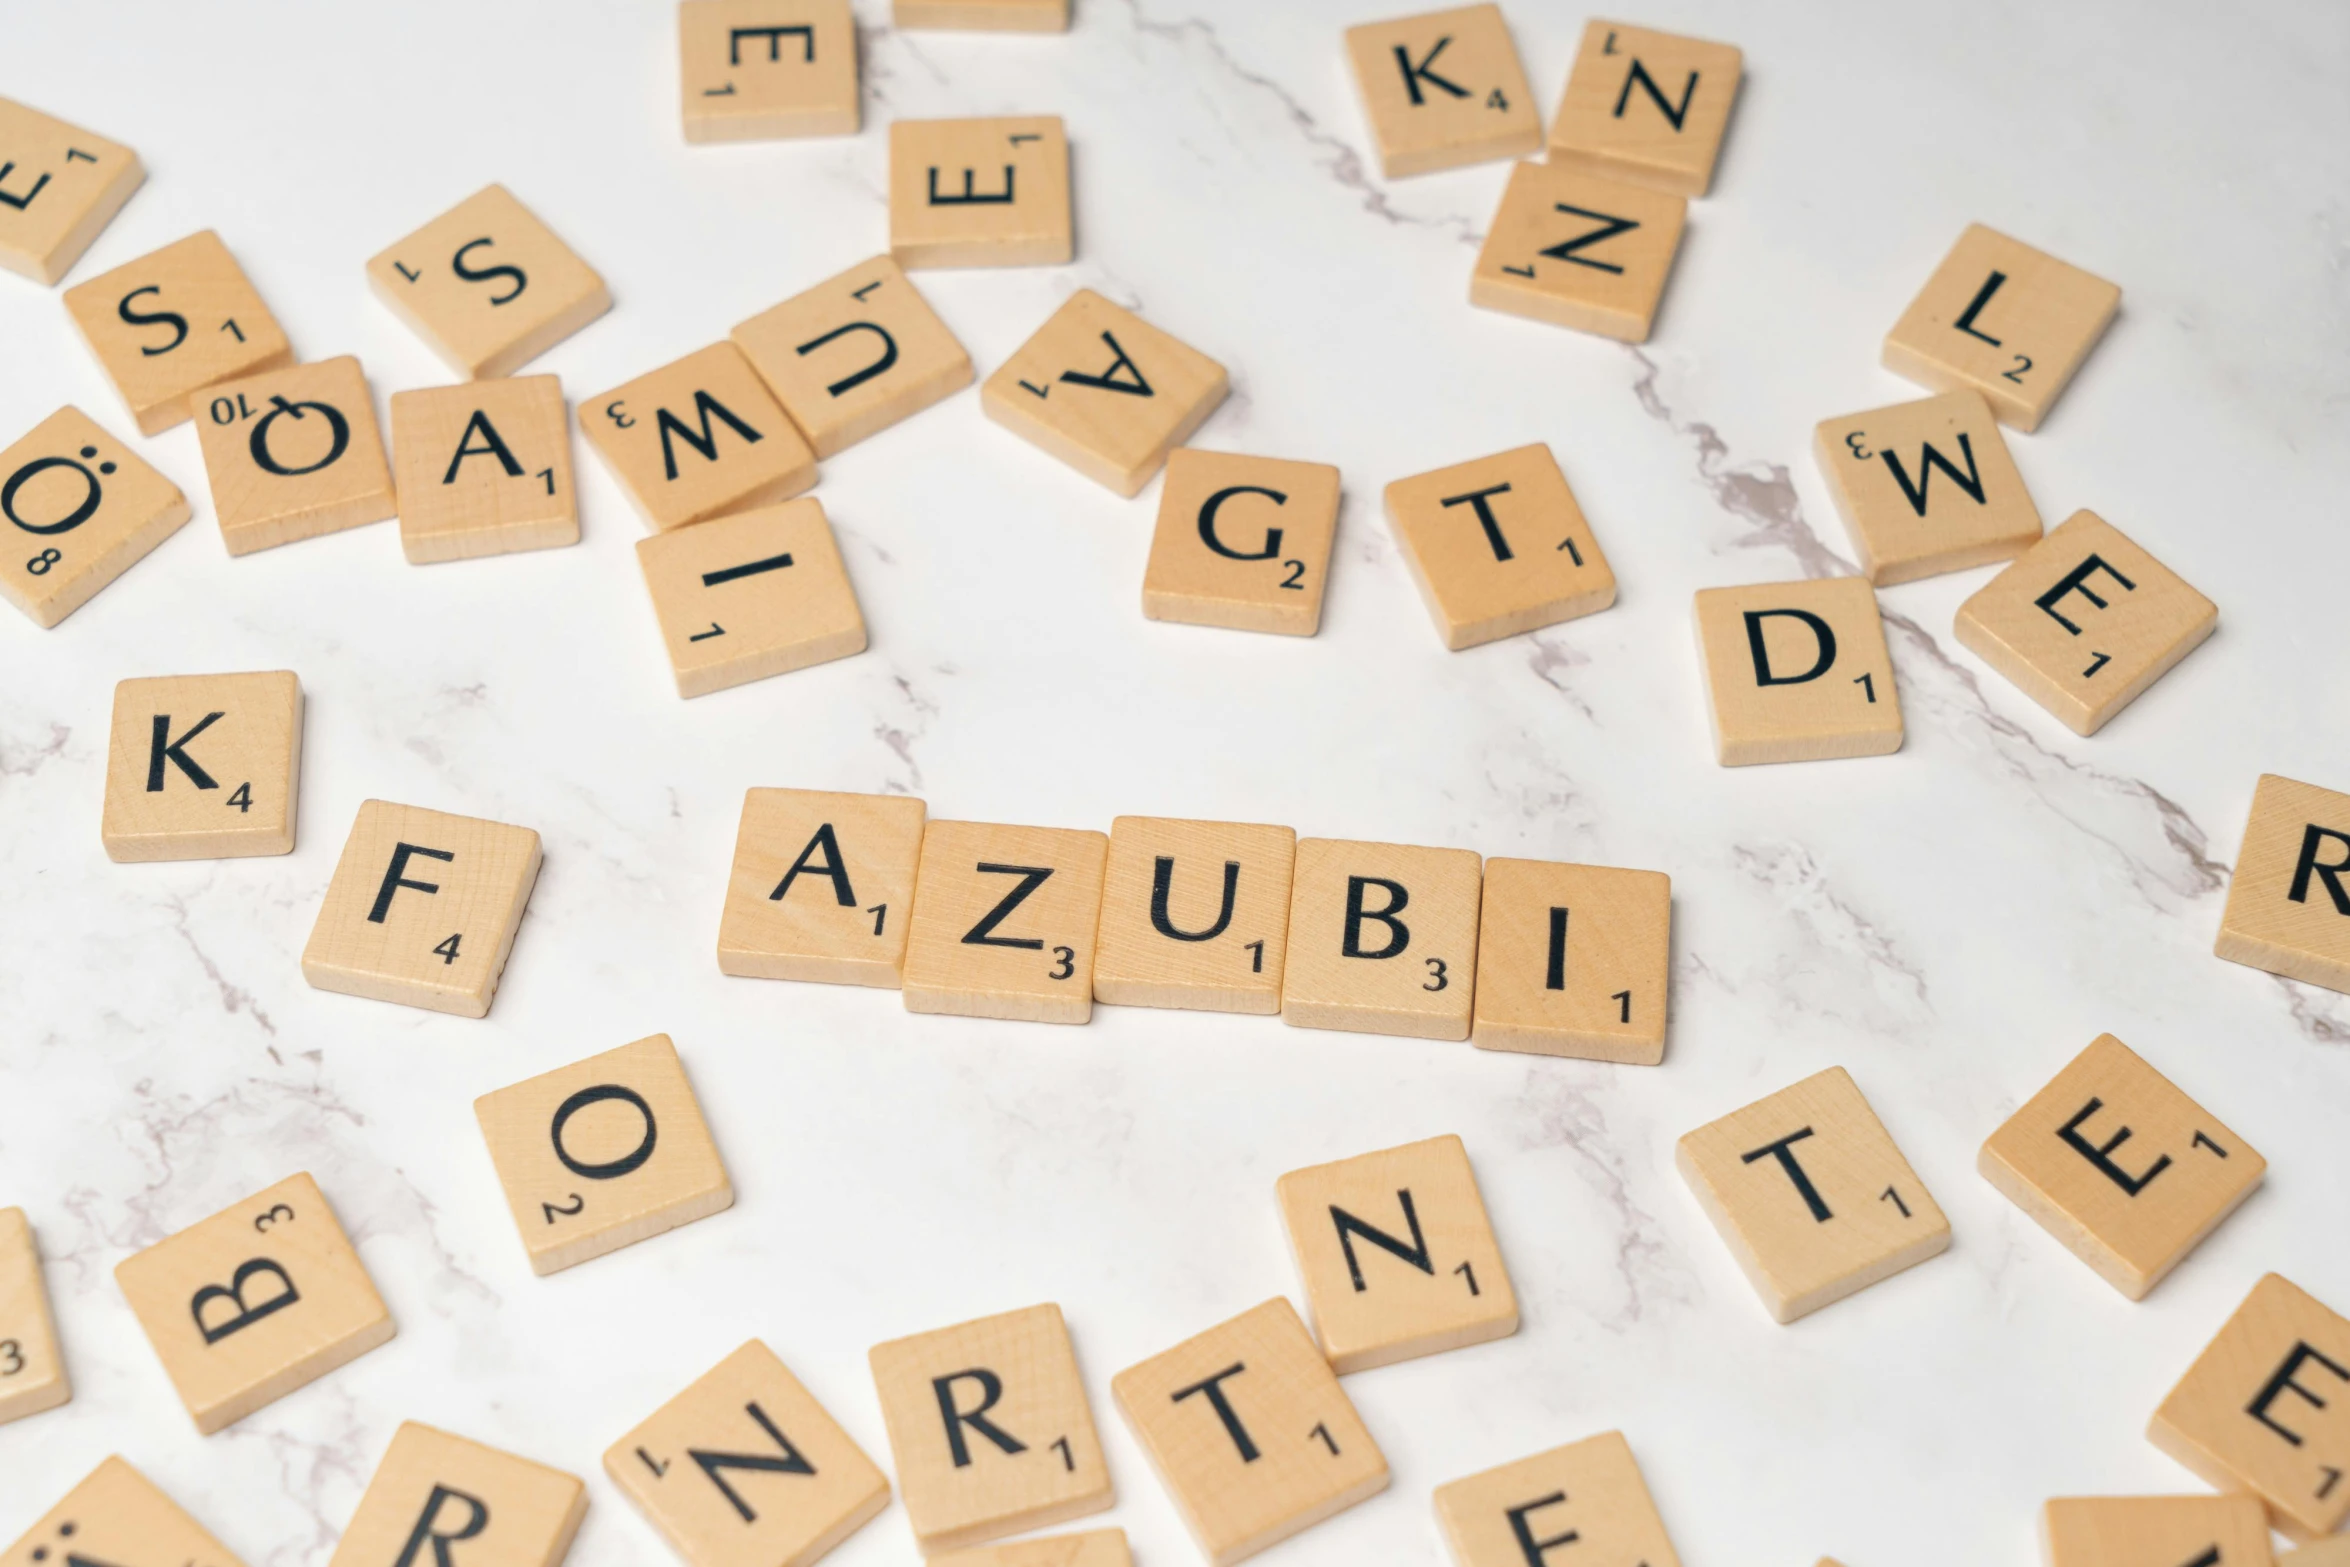 scrabbled letters that spell out a word as words from scrabbles and a keyboard are laid out on a table